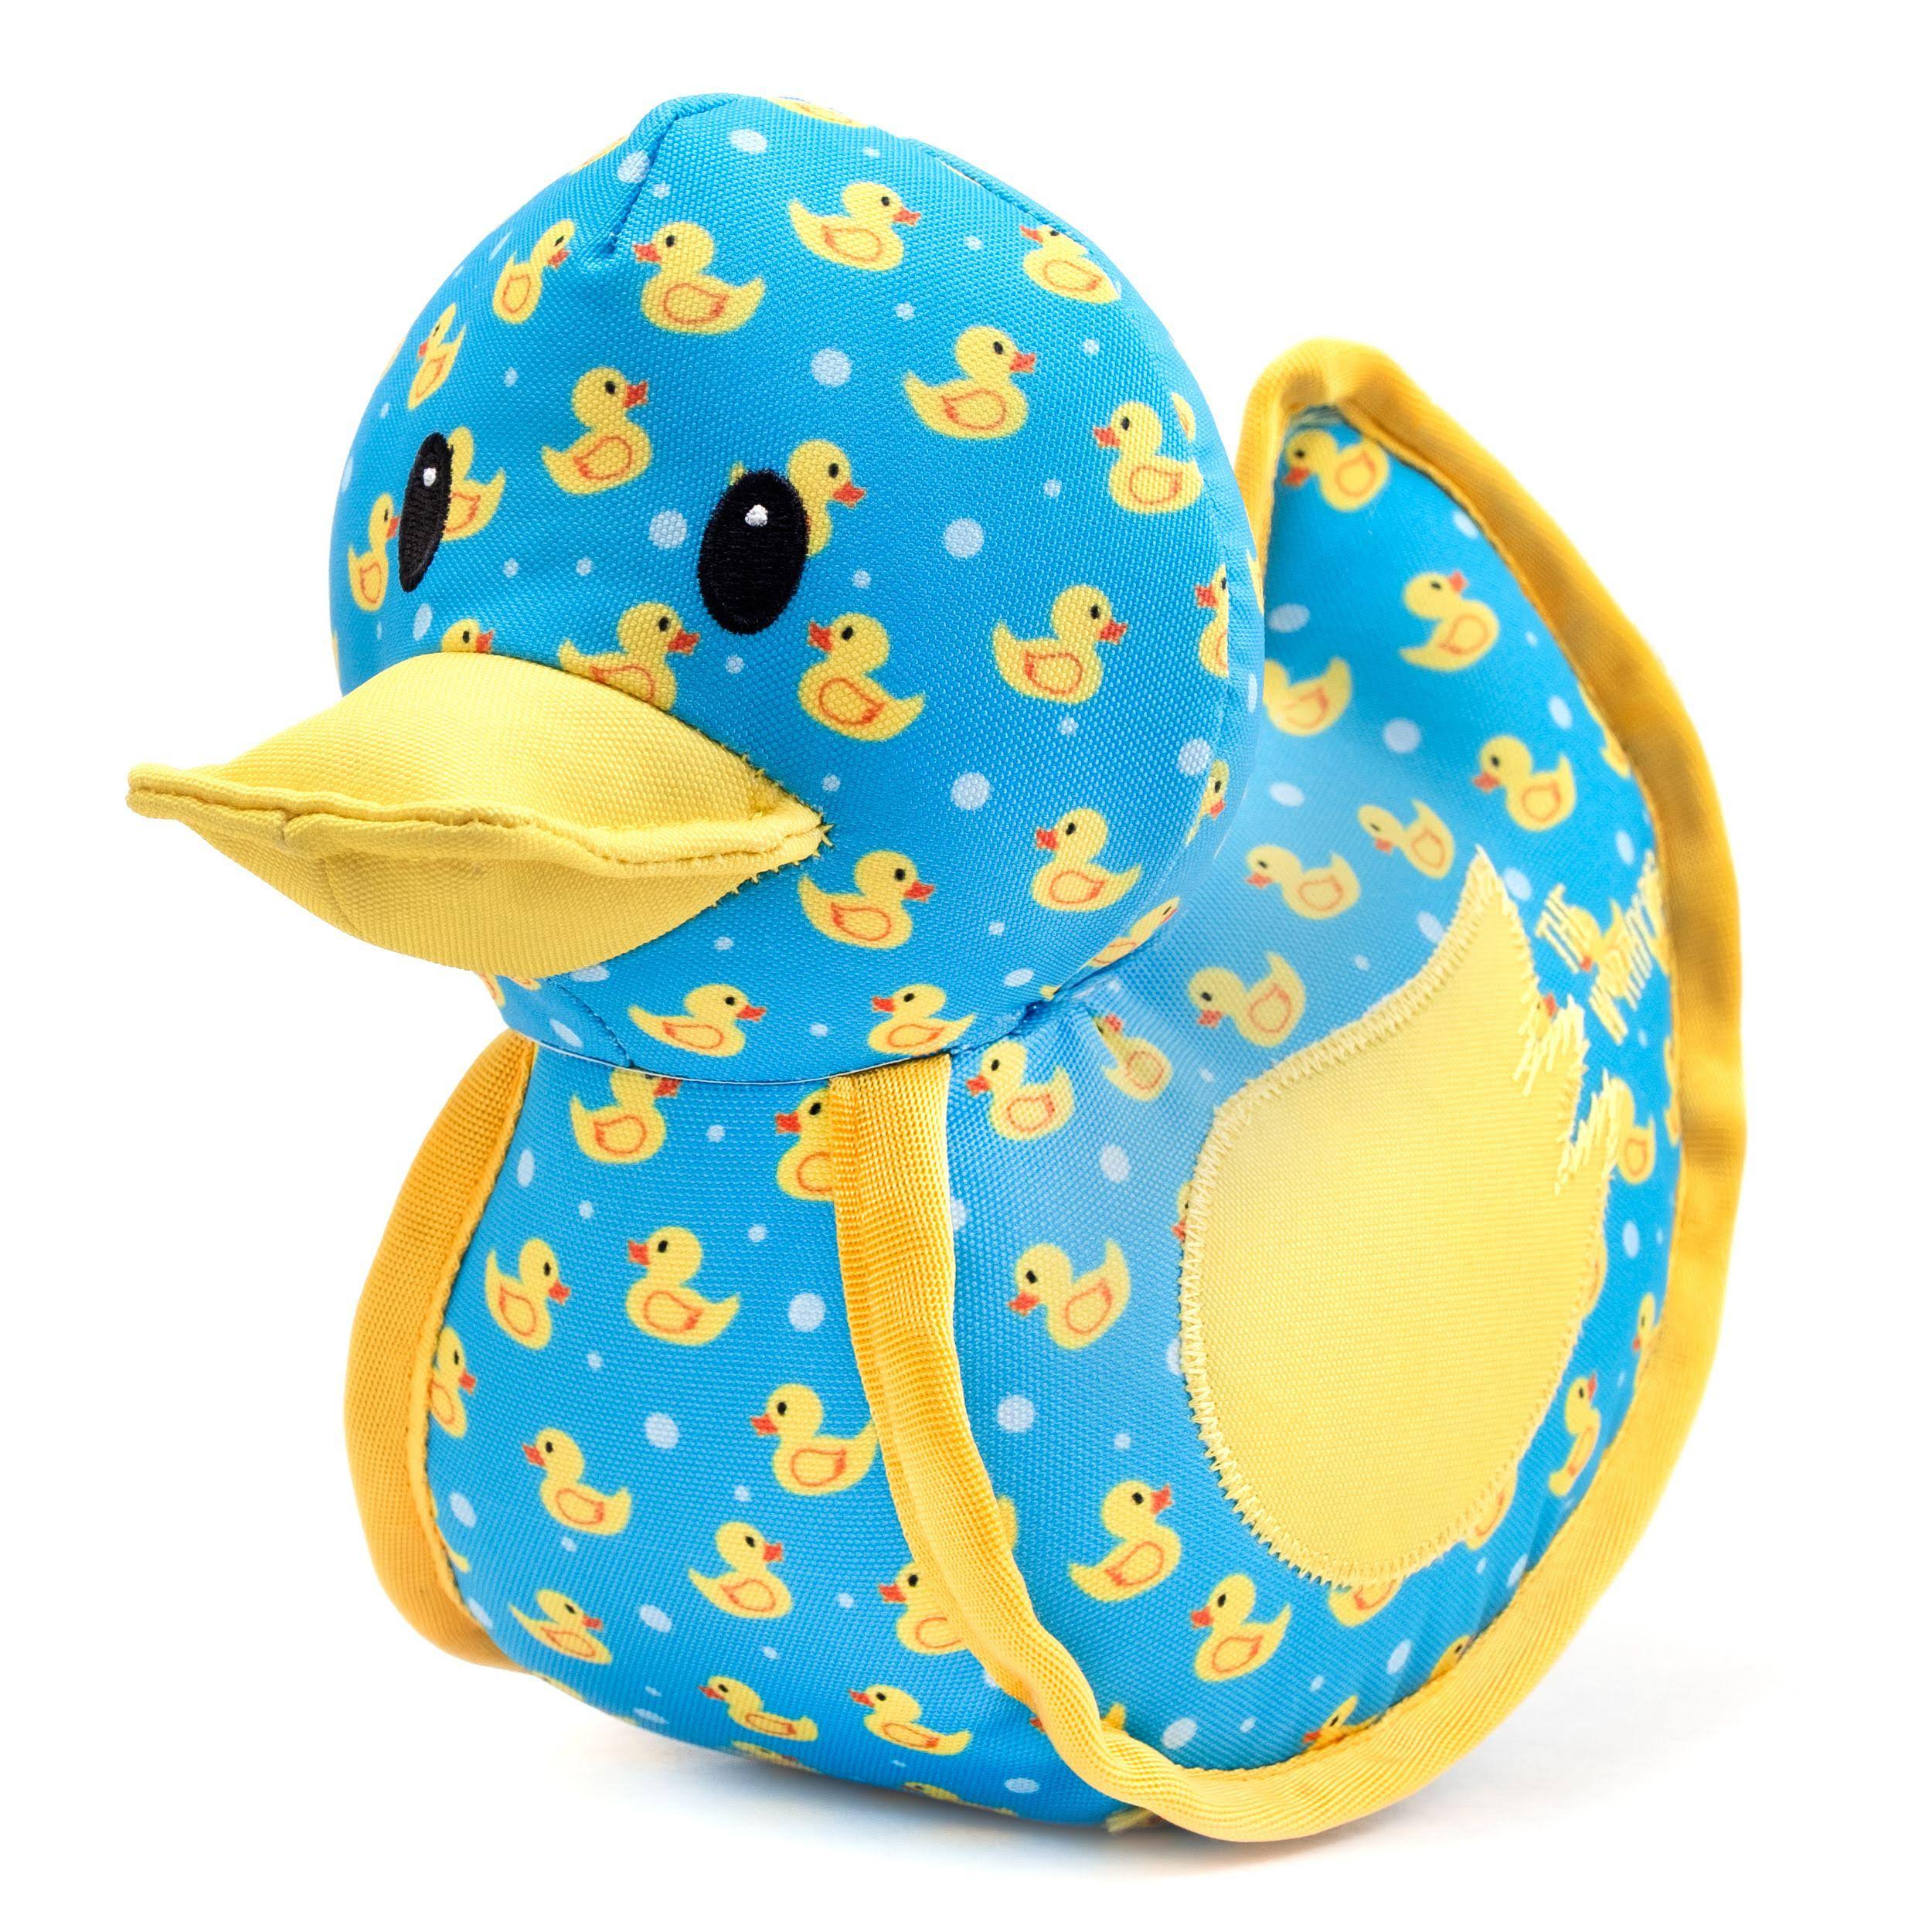 The Worthy Dog Rubber Duck Dog Toy Small